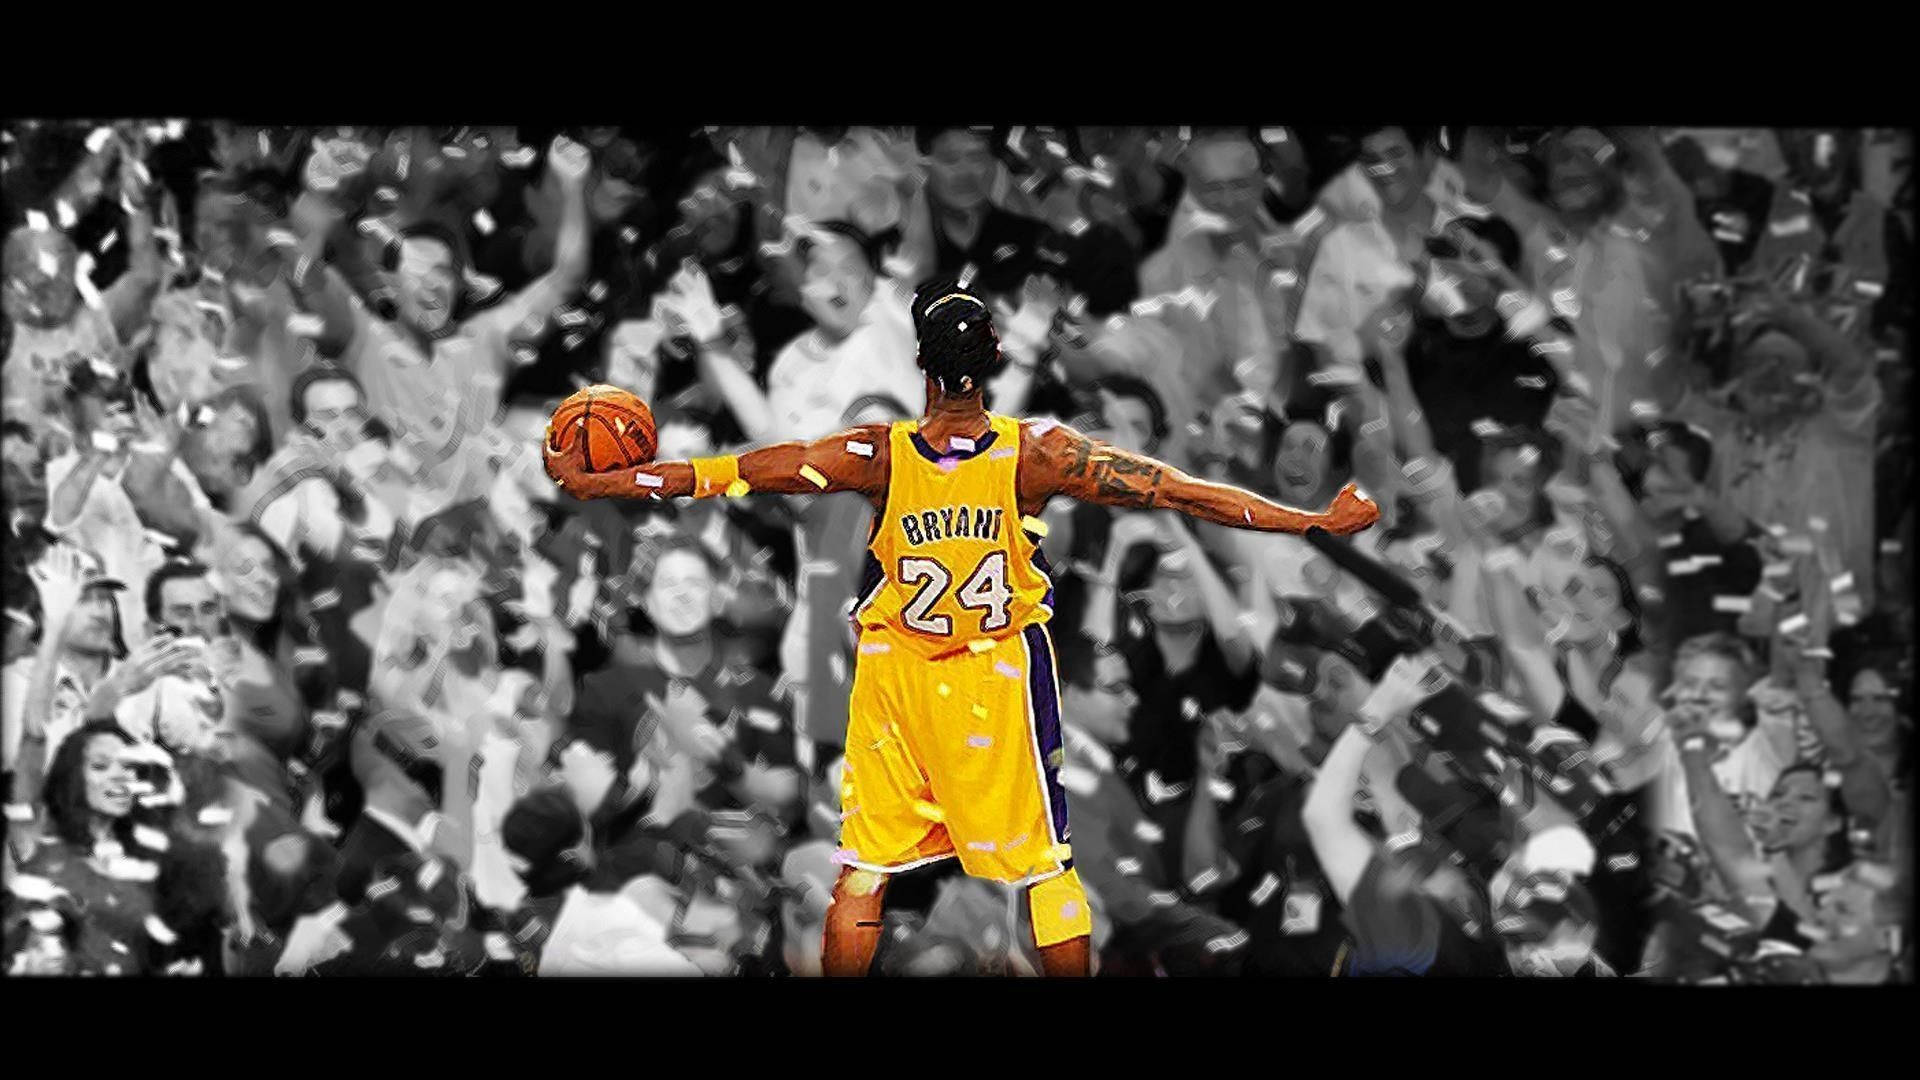 Kobe Bryant celebrates after a victorious game Wallpaper